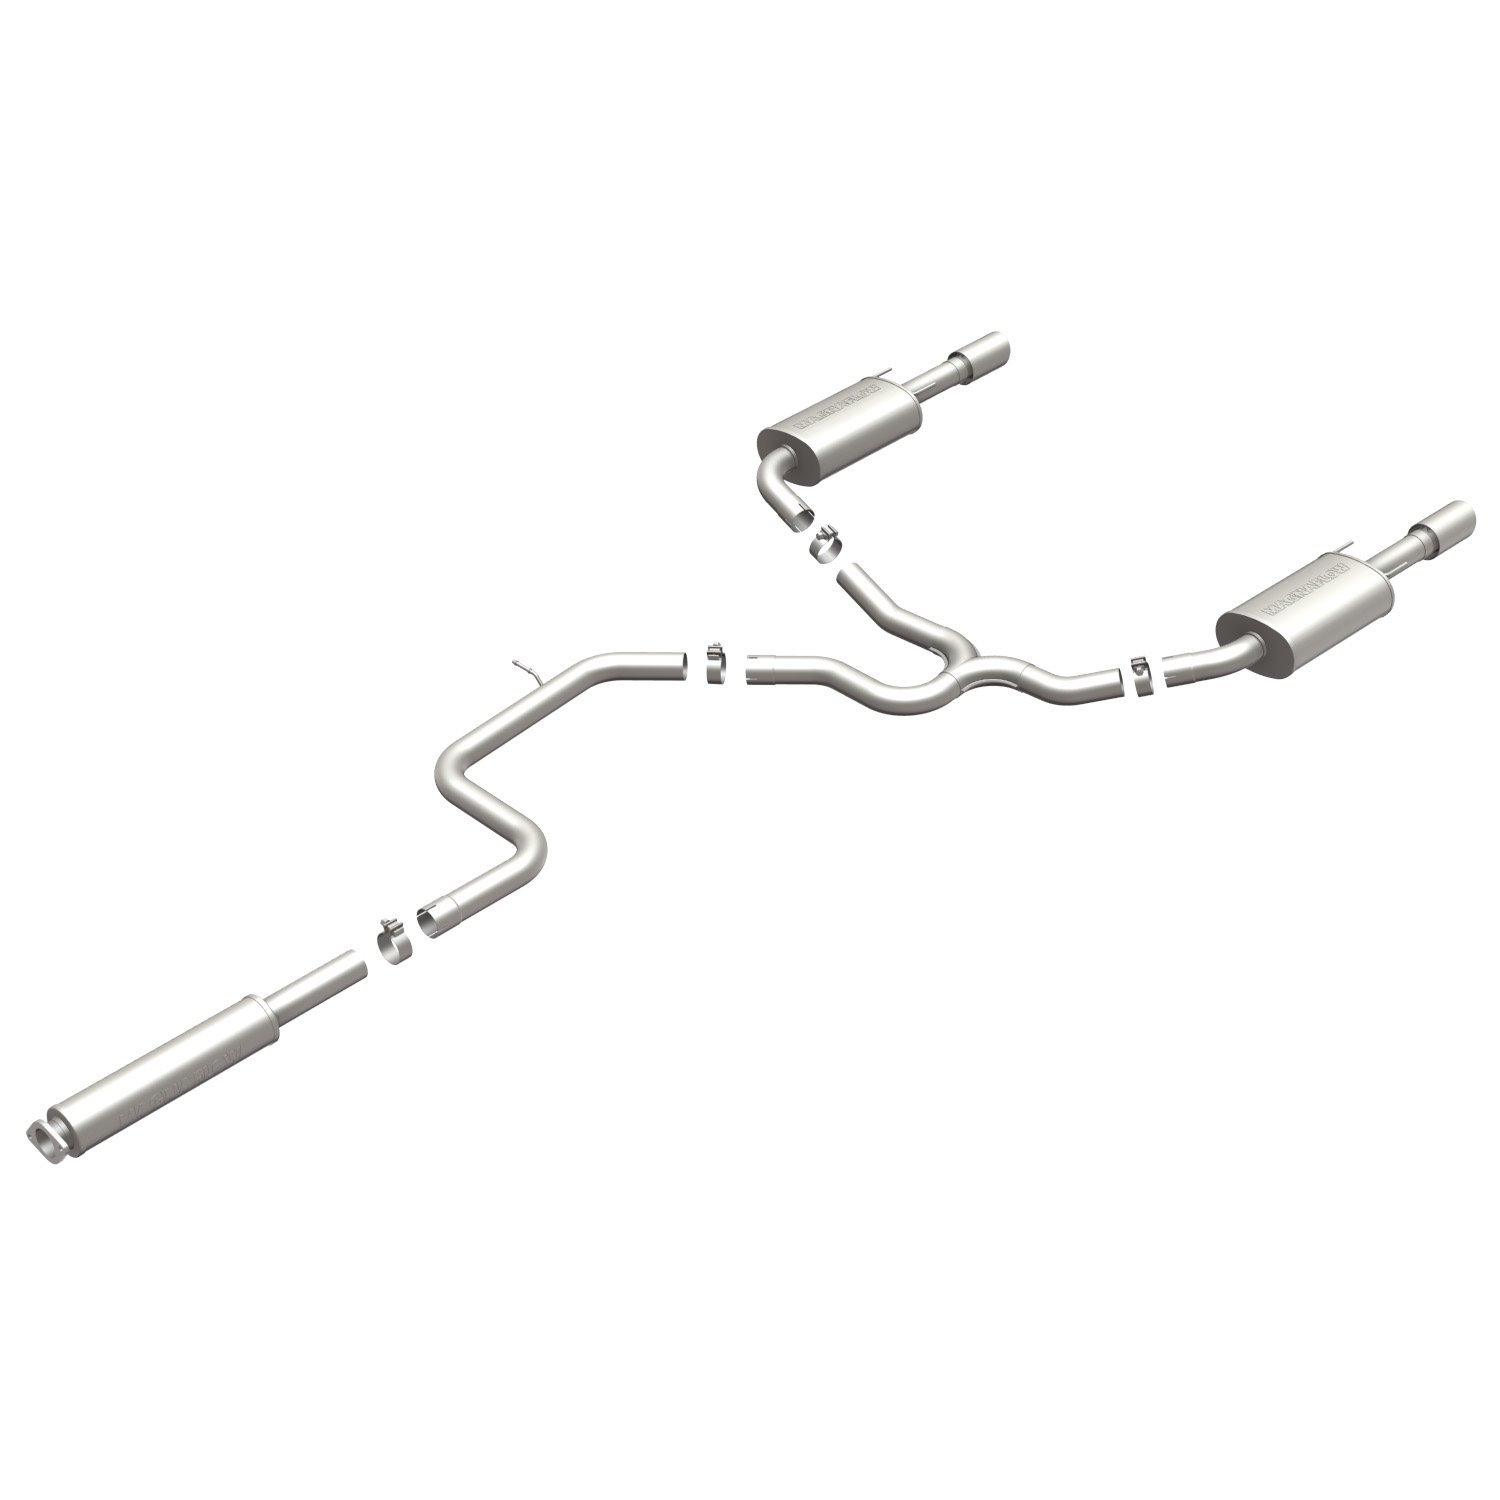 Magnaflow 16729: Cat-Back Exhaust System 2000-05 Chevy ... 2001 impala exhaust schematic 